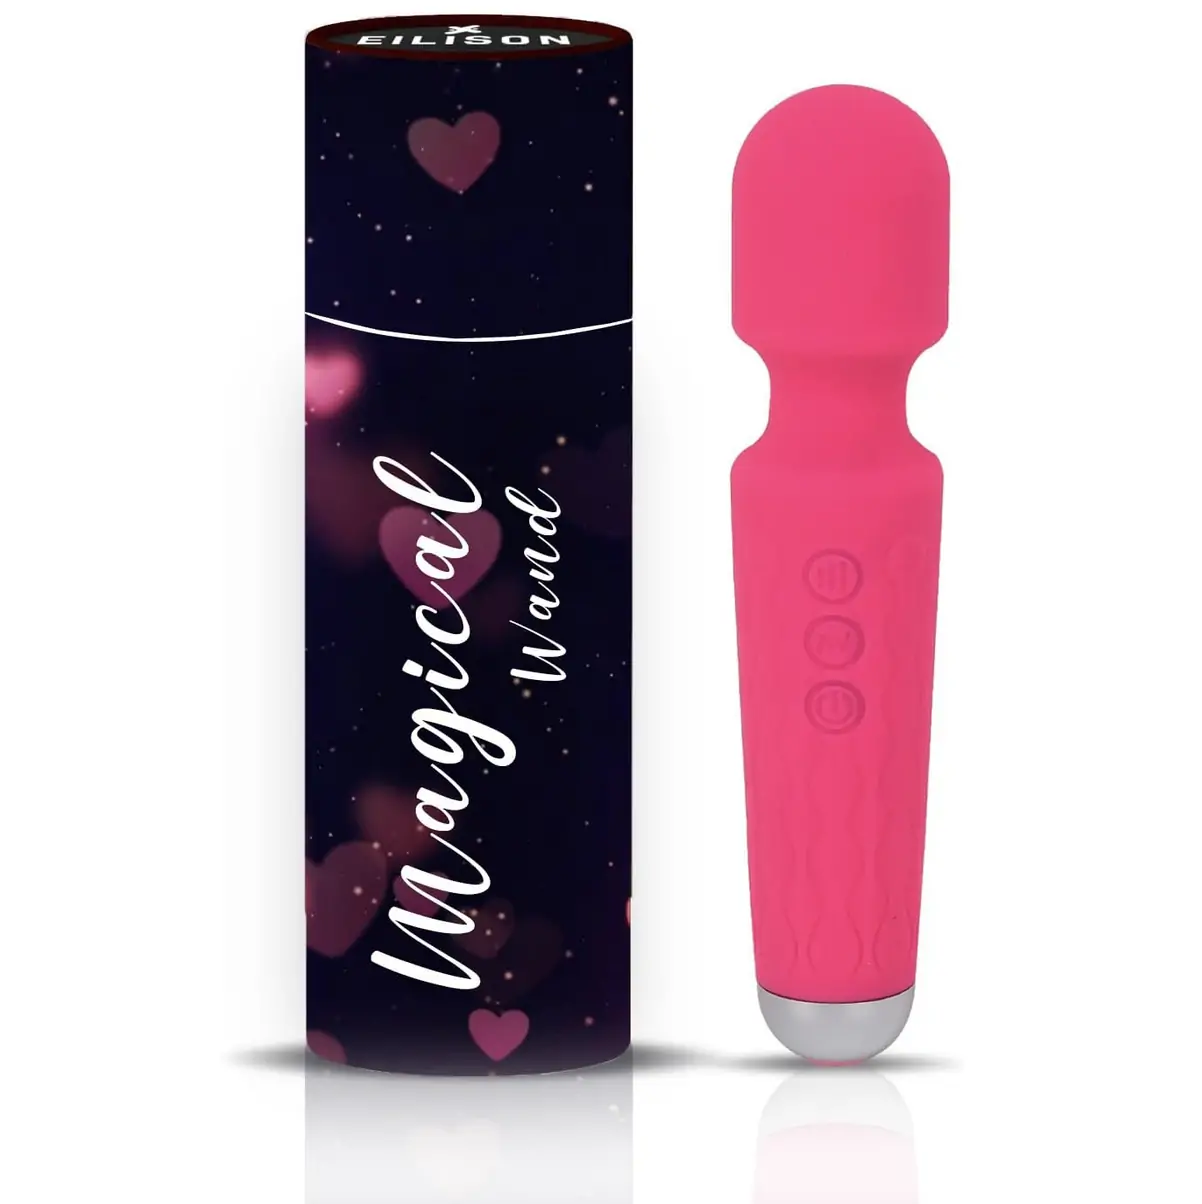 Handheld Rechargeable Massager with Vibration Modes Speeds Pink